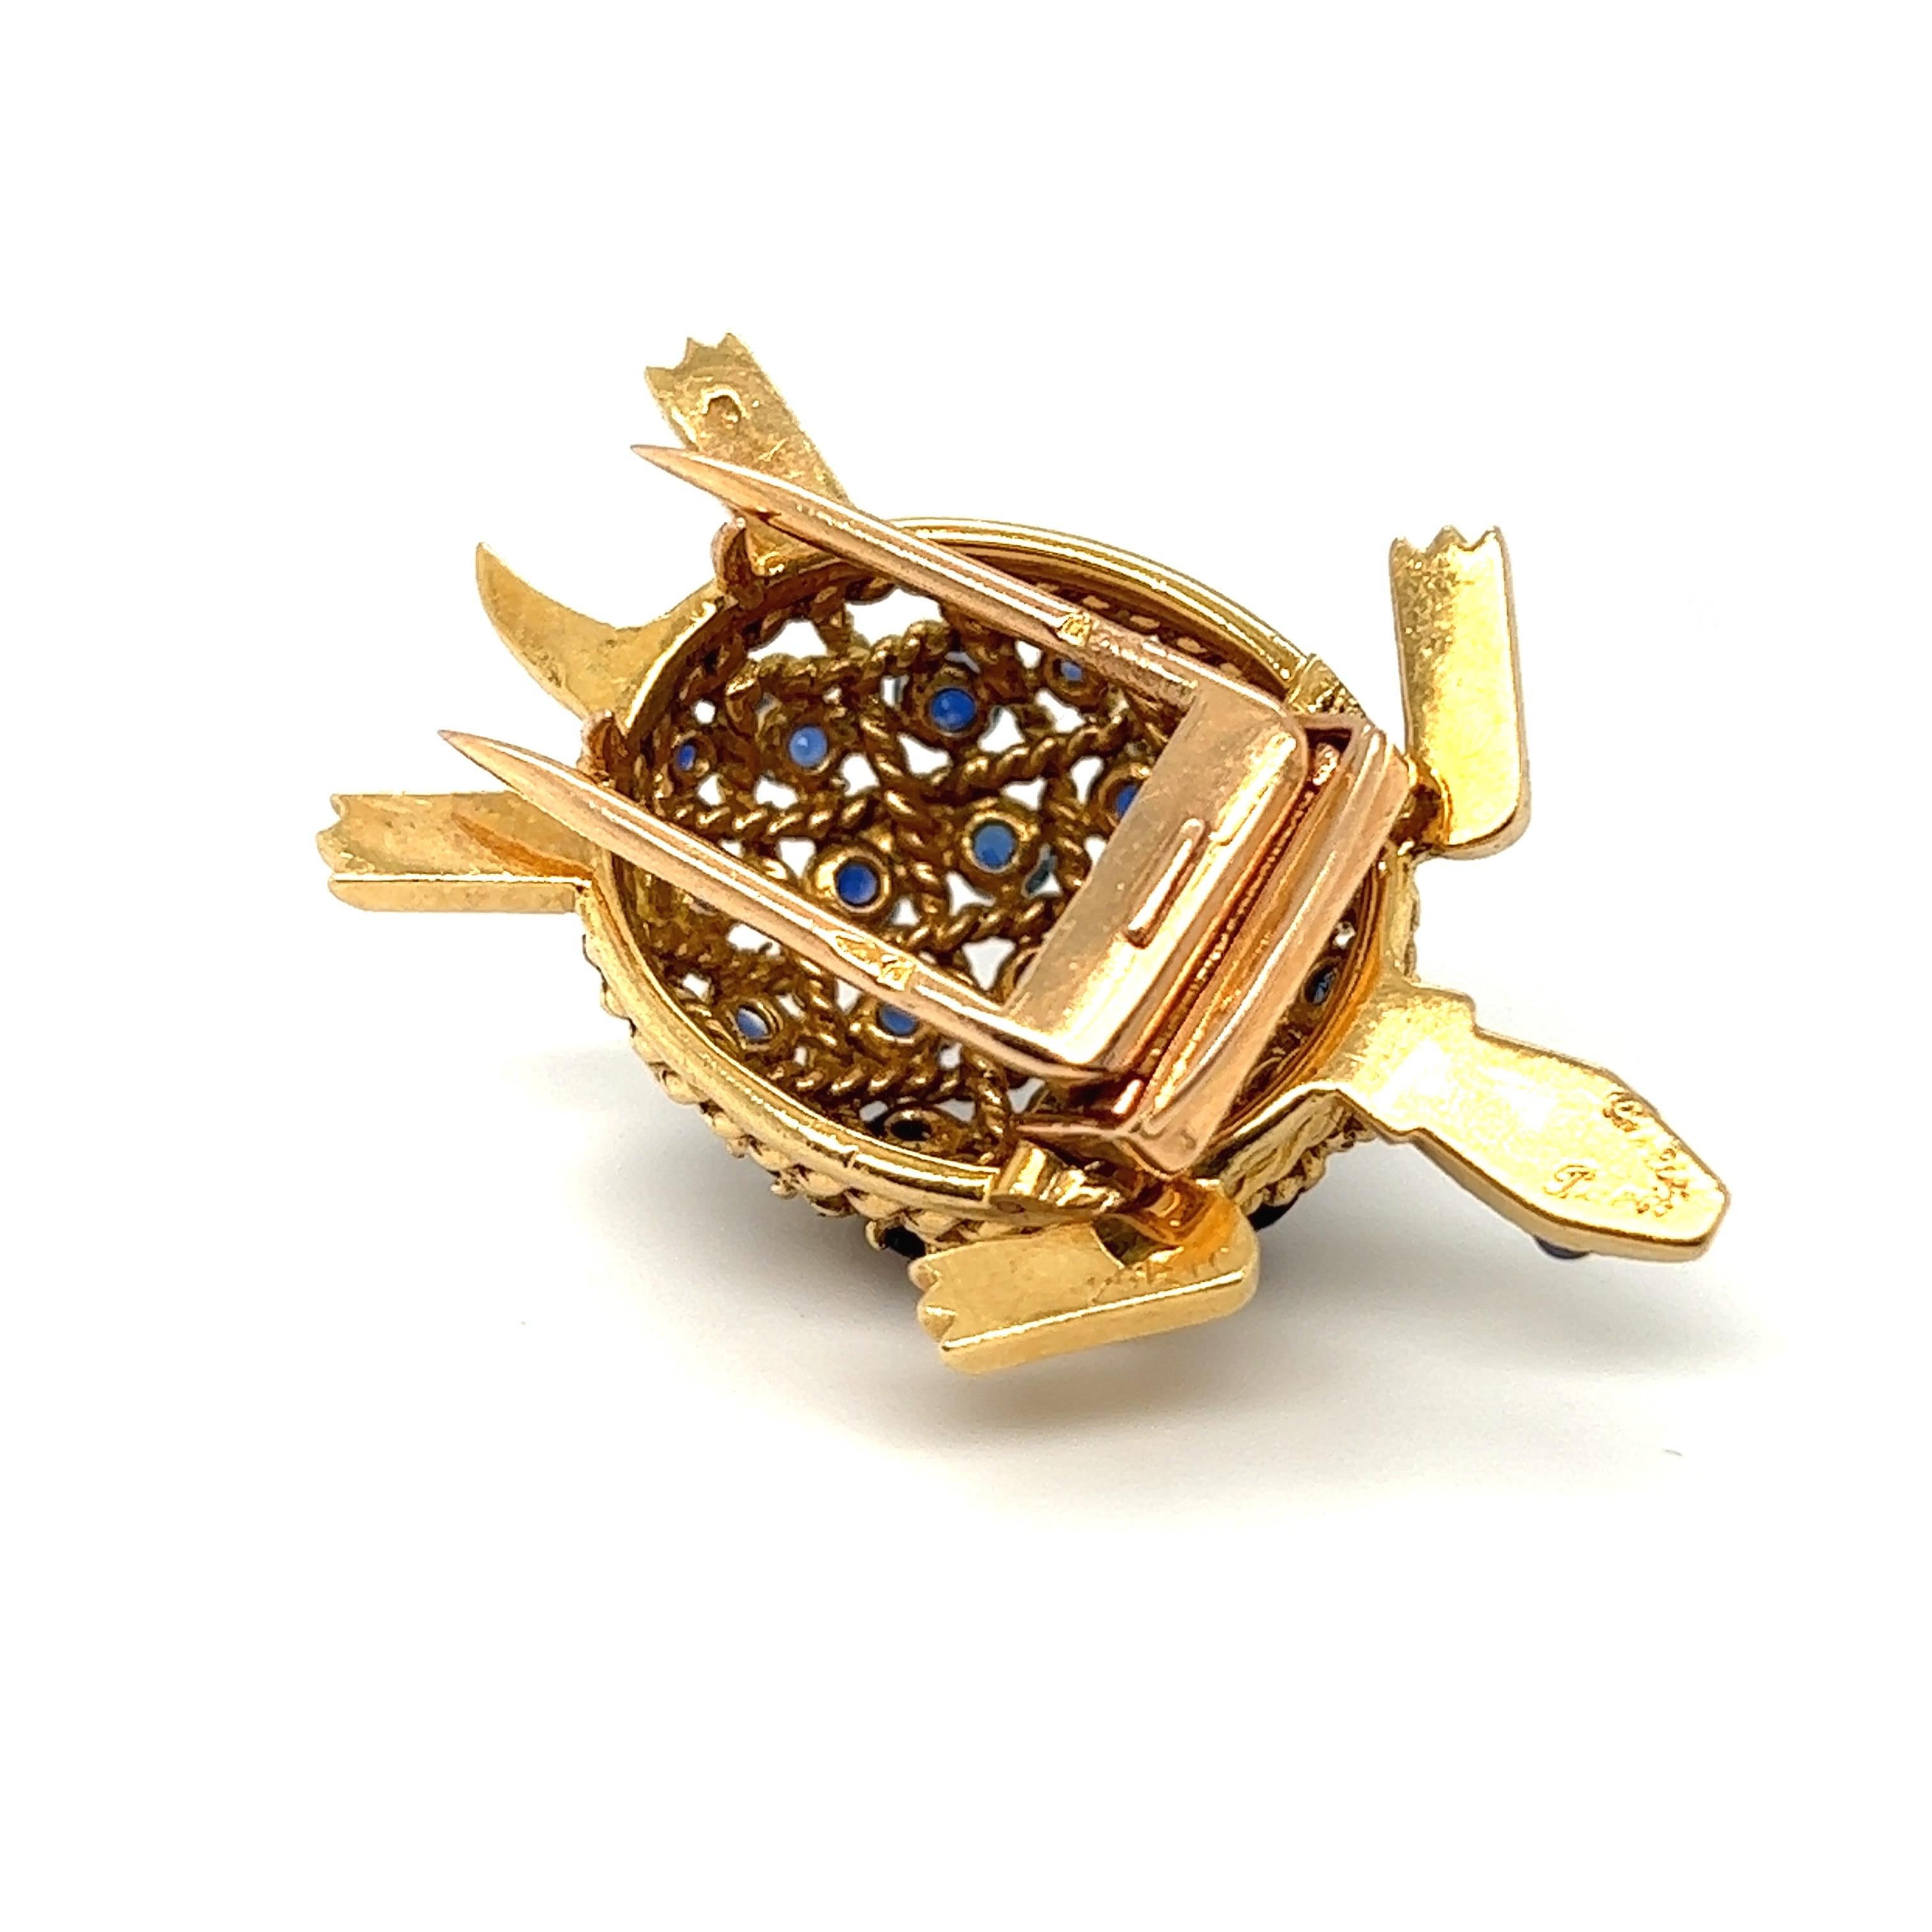 Post-War 18 Karat Yellow Gold and Sapphire Turtle Brooch, by Cartier, circa 1950-1960s For Sale